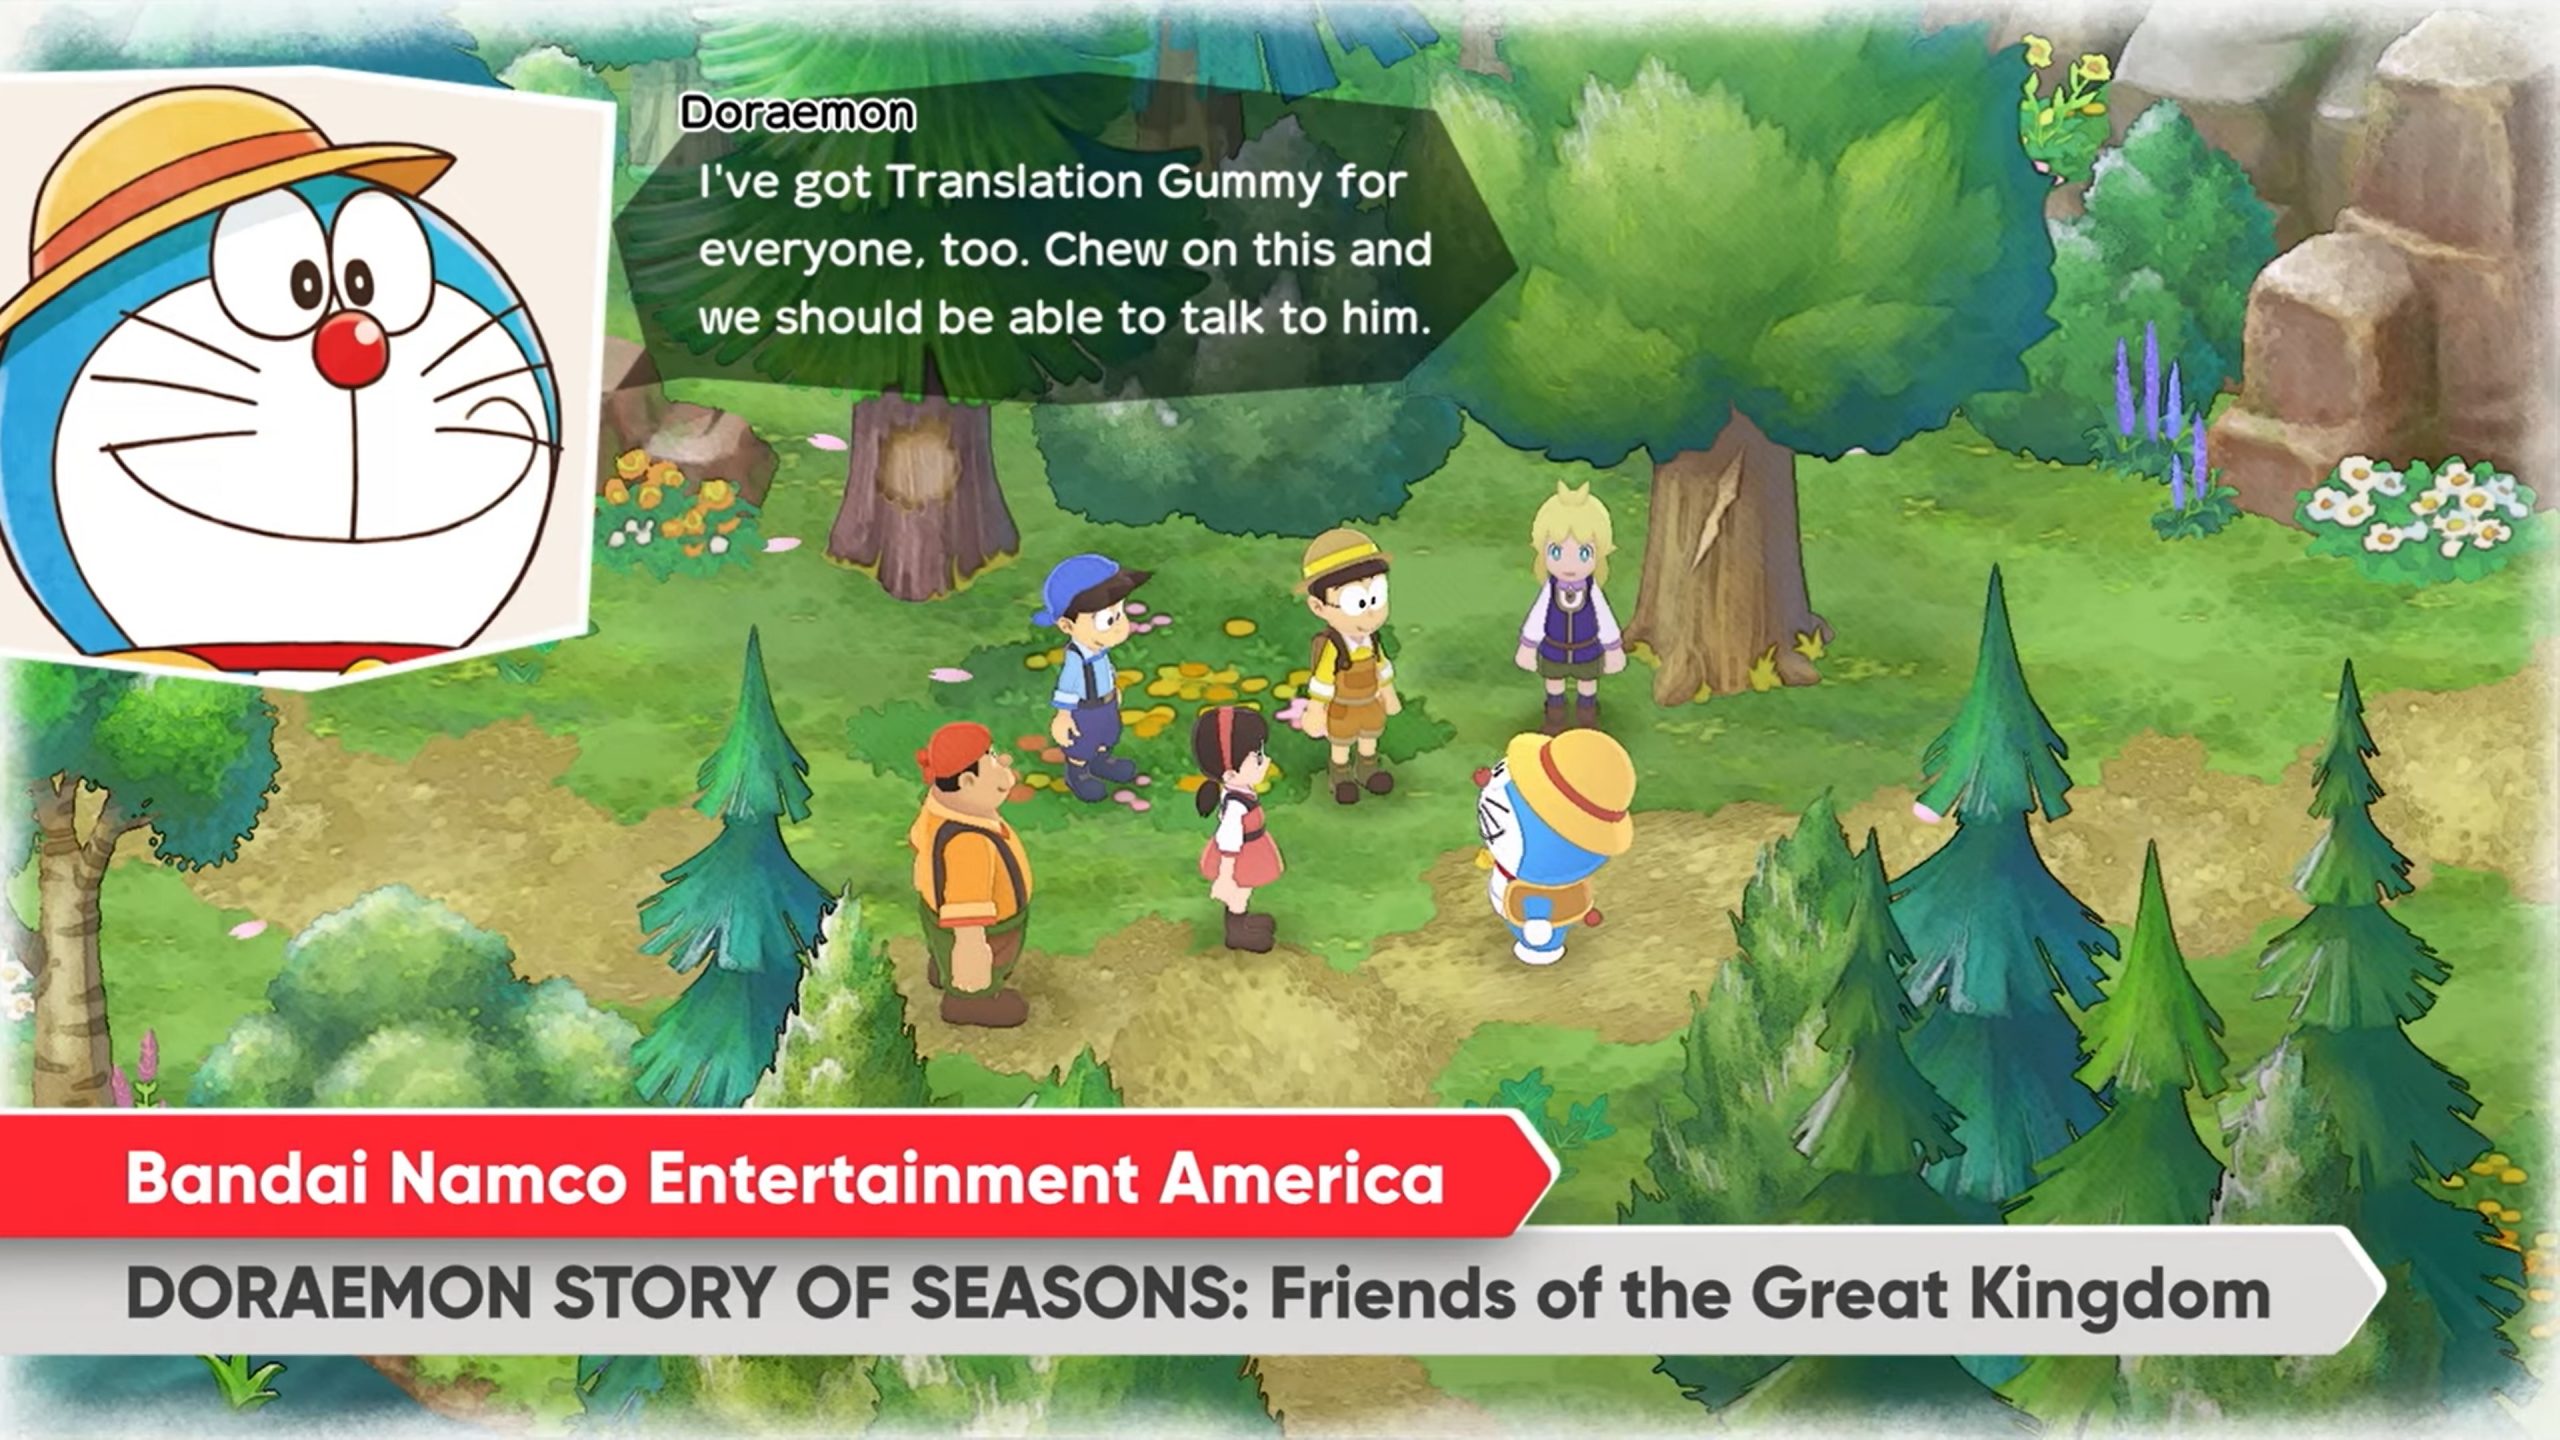 Doraemon Story of Seasons: Friends of the Great Kingdom announced for Switch